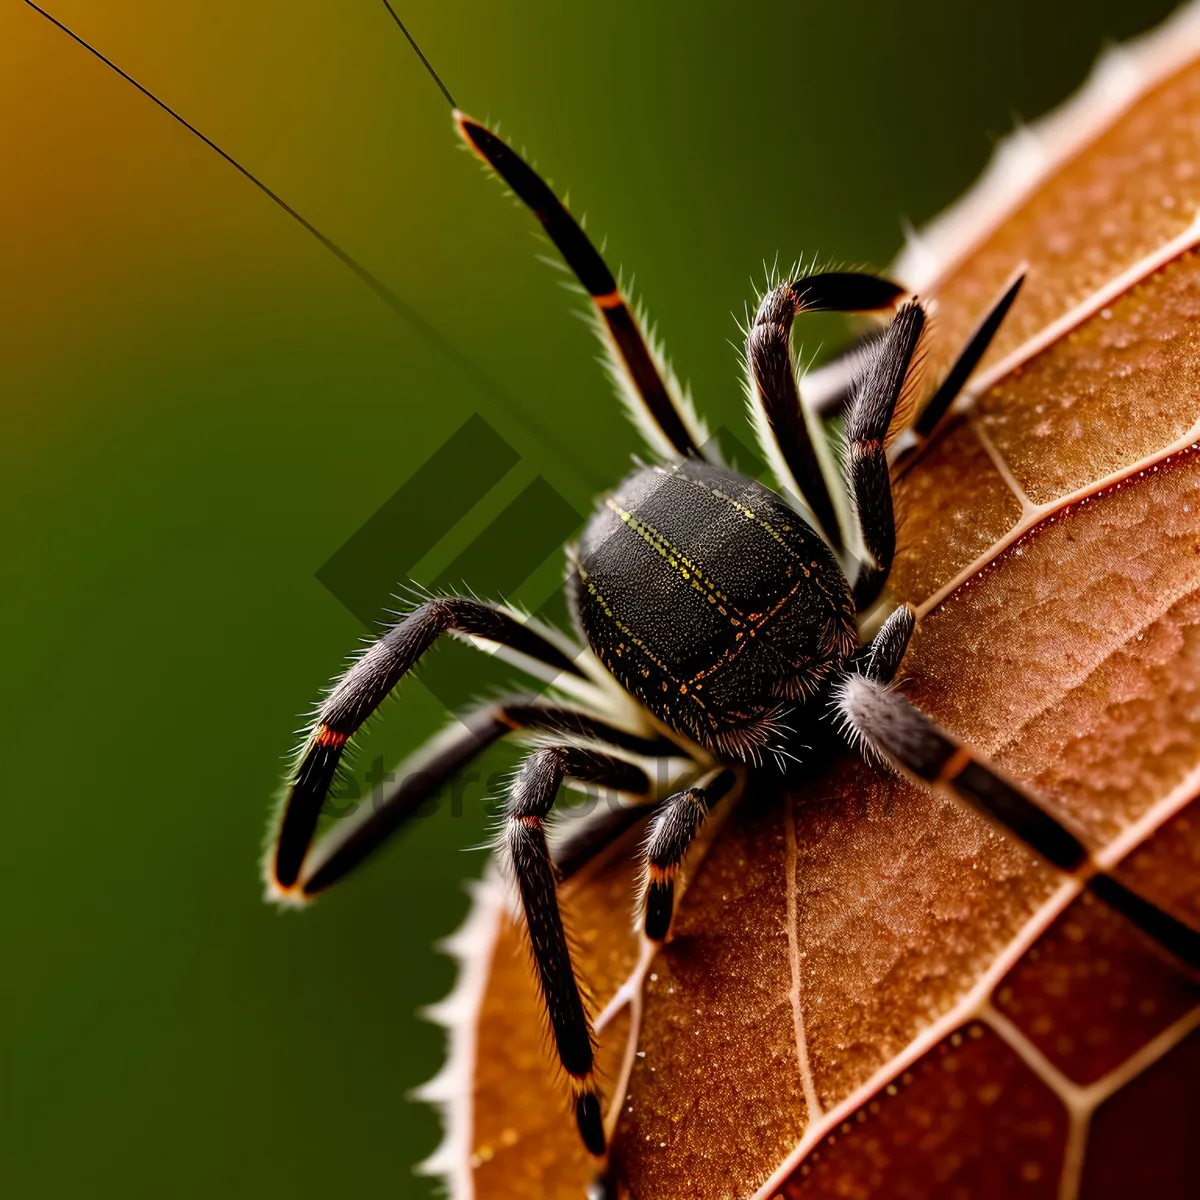 Picture of Black Garden Spider on Leaf with Wings